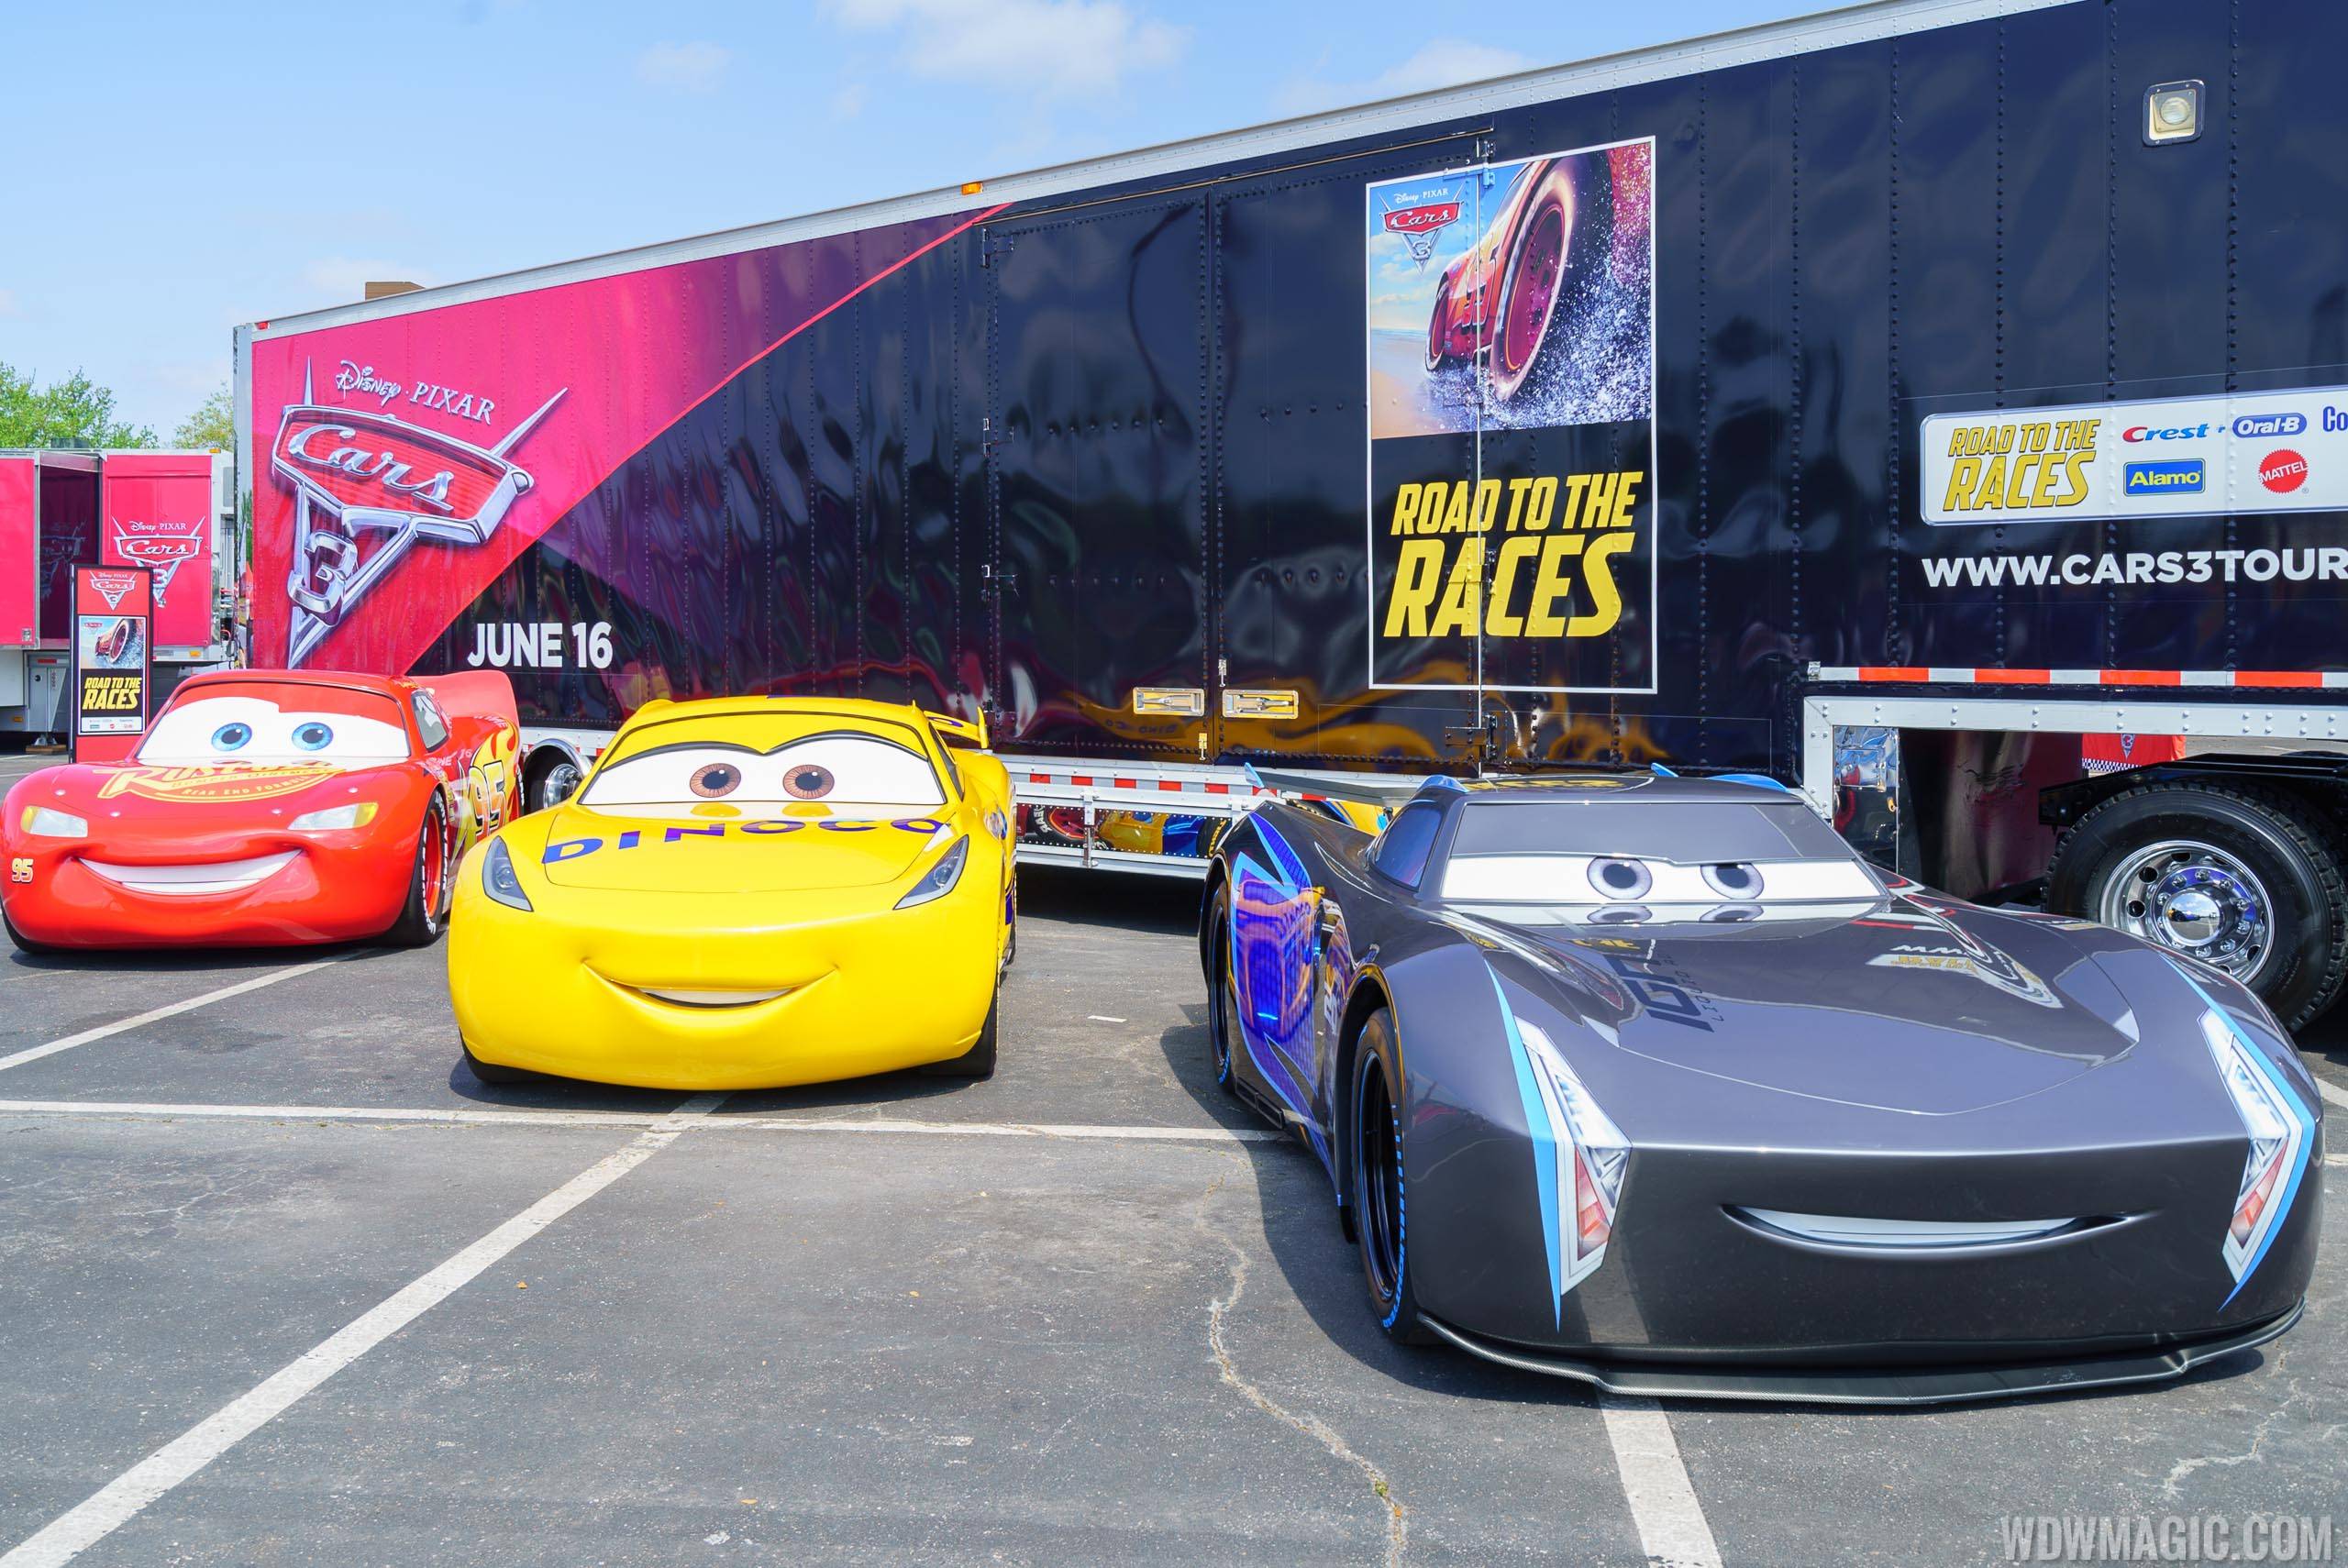 Cars 3 Road to the Races at Disney Springs